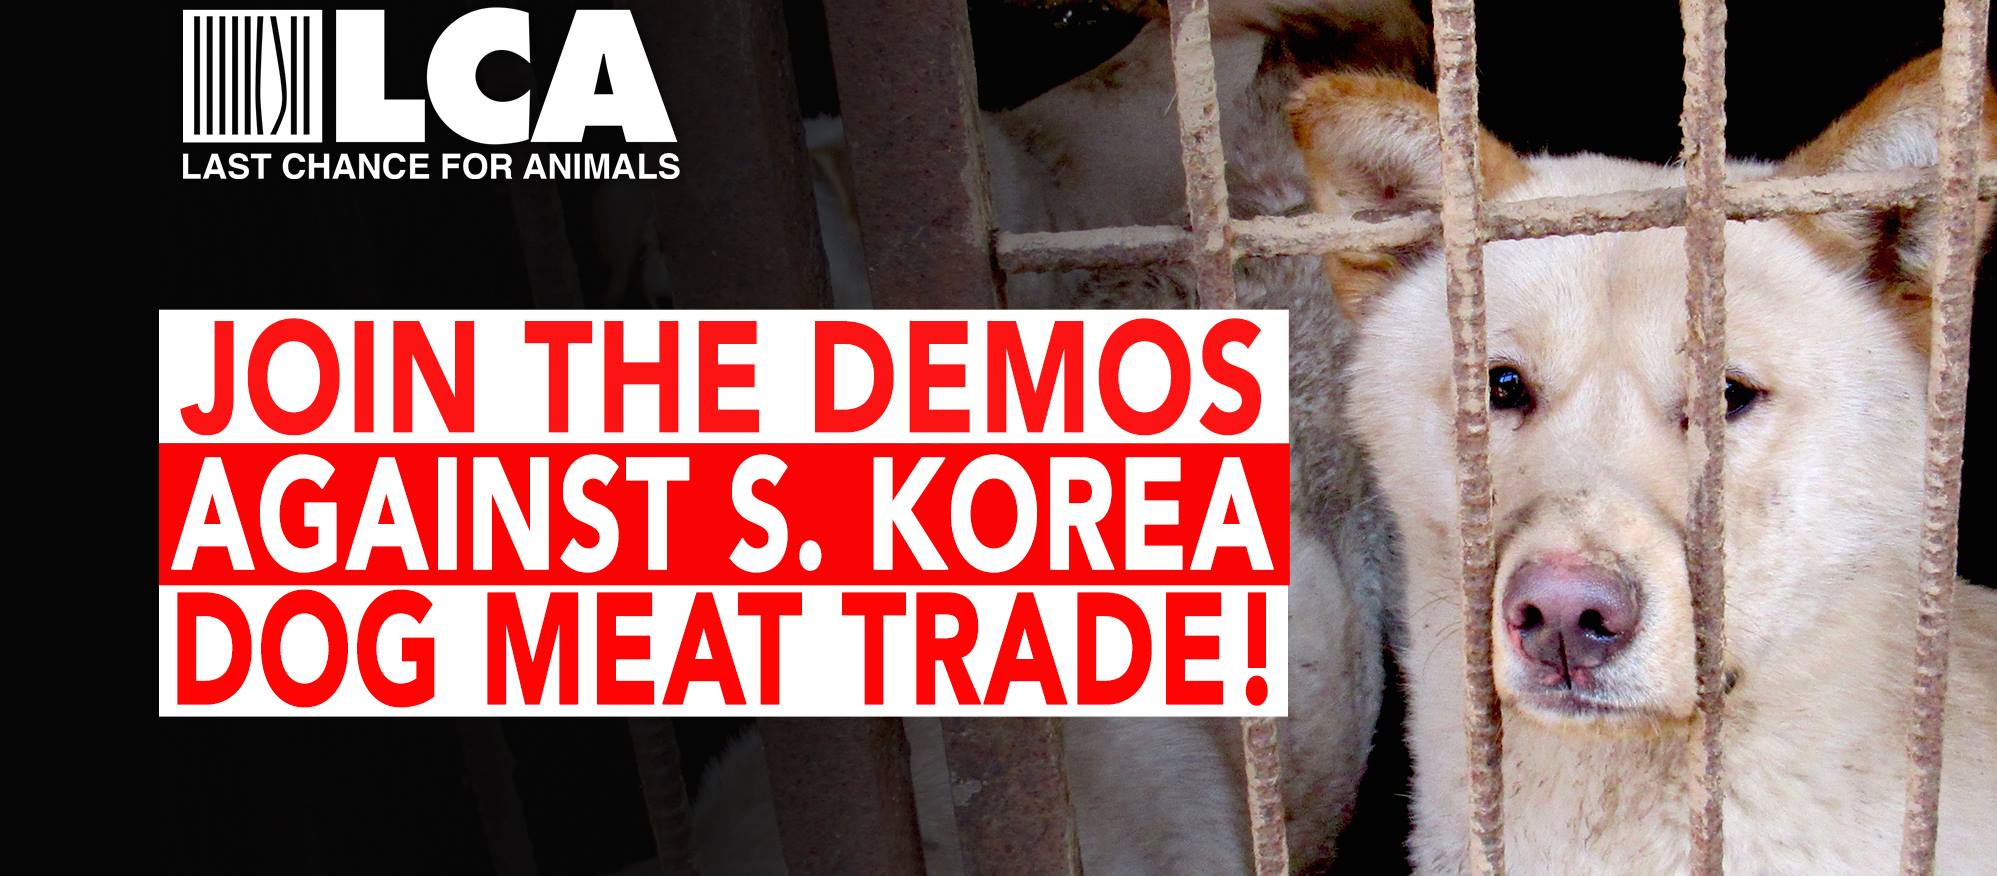 Join the Two-Day Demo Against the South Korean Dog Meat Trade